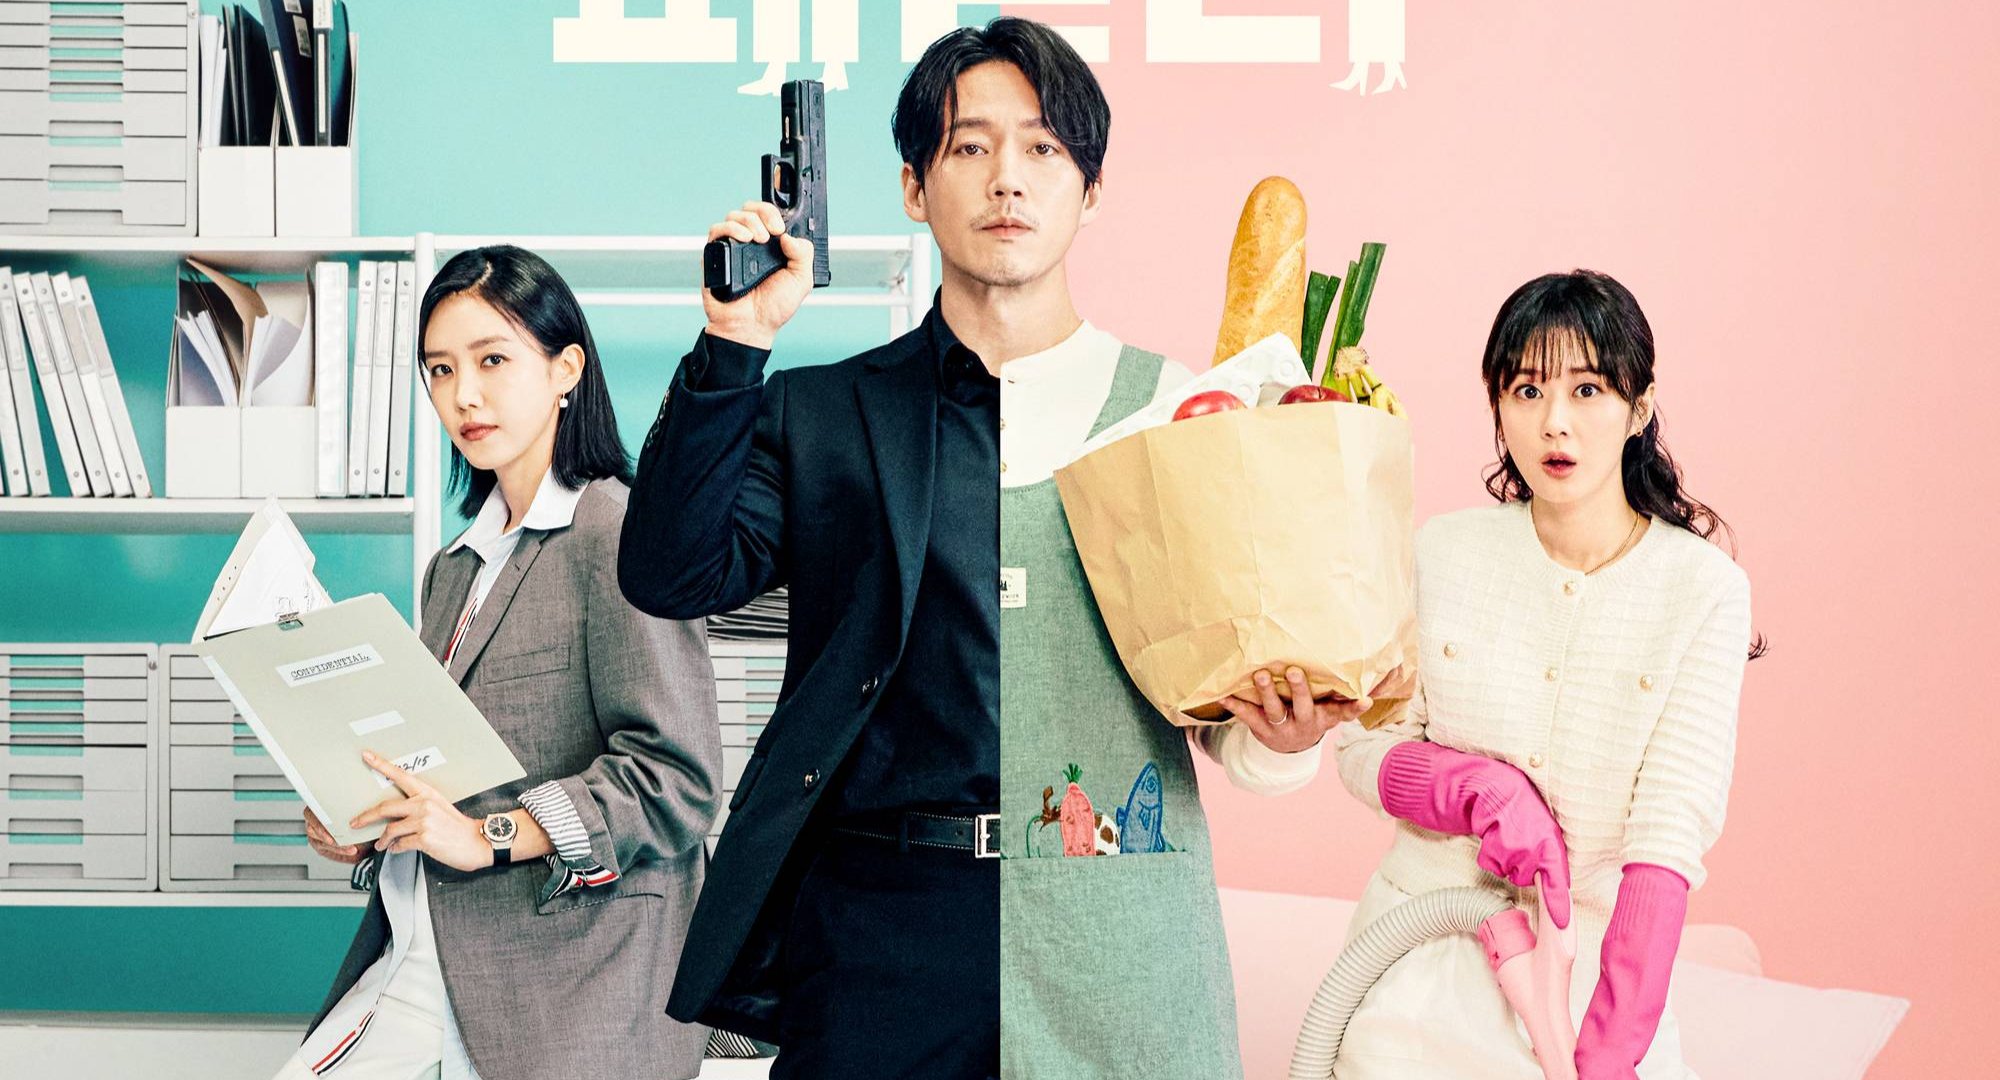 Family': The Spy Comedy K-Drama Is a Perfect Watch for Fans of